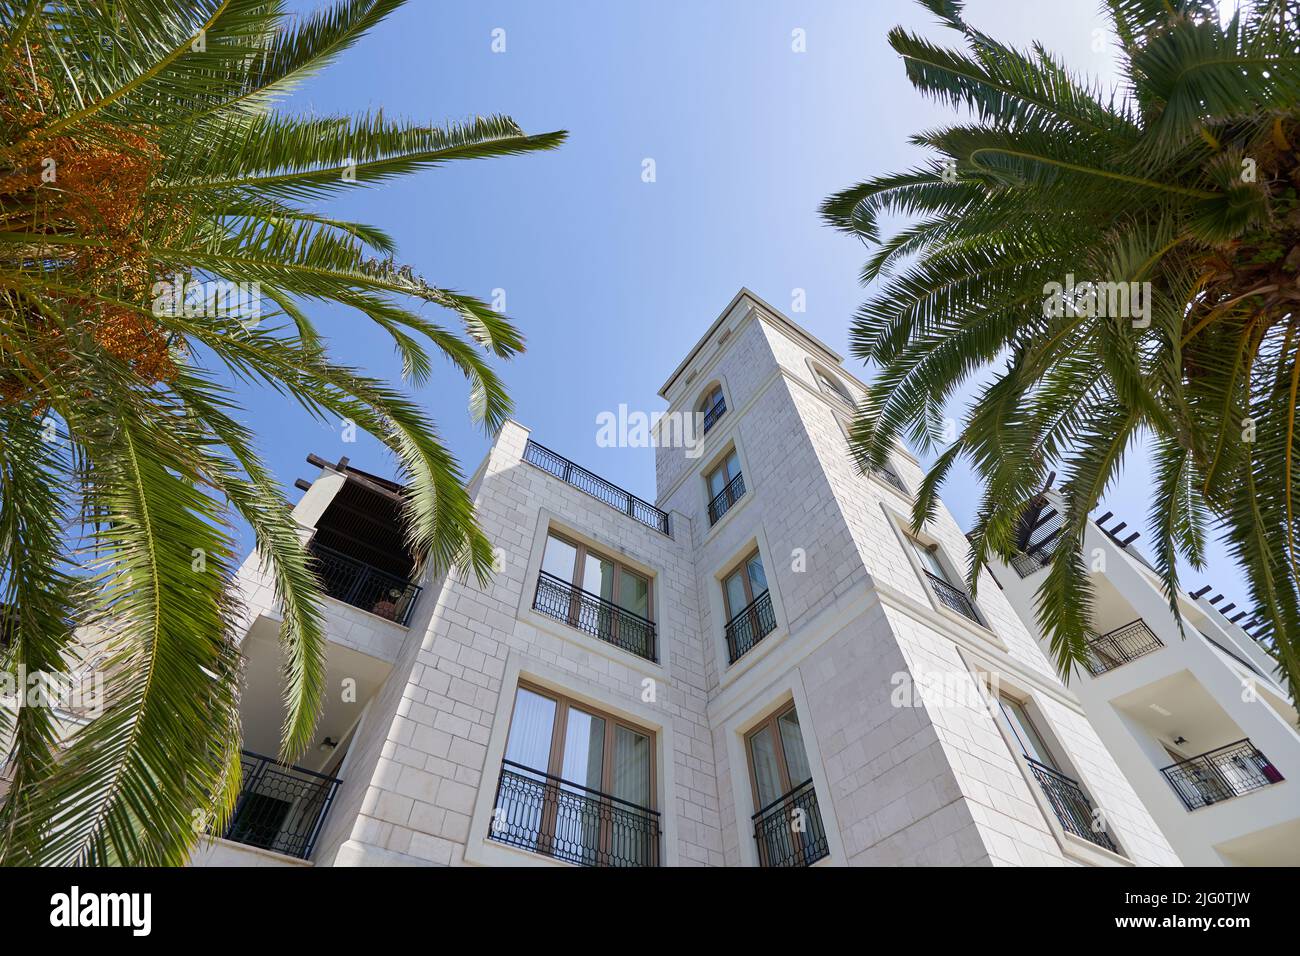 View of a luxury residential building through palm trees, housing concept. Stock Photo